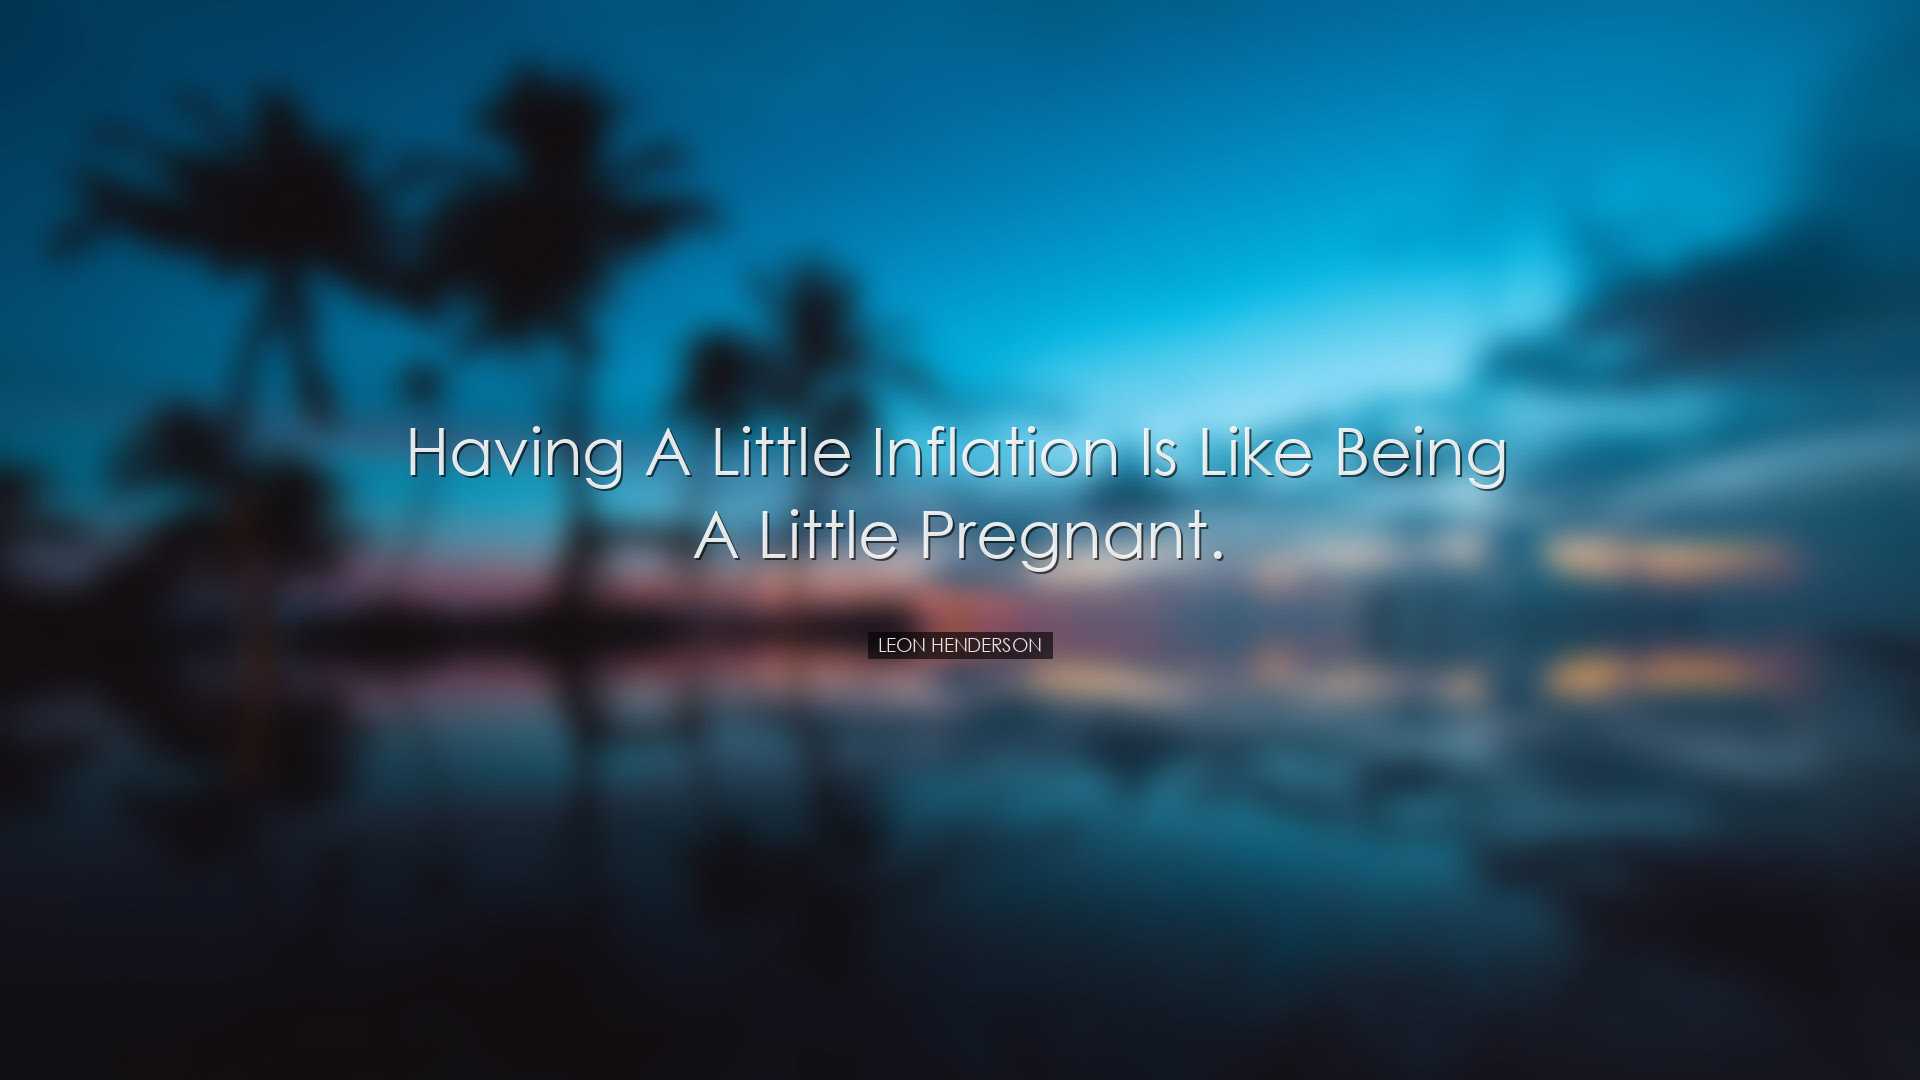 Having a little inflation is like being a little pregnant. - Leon